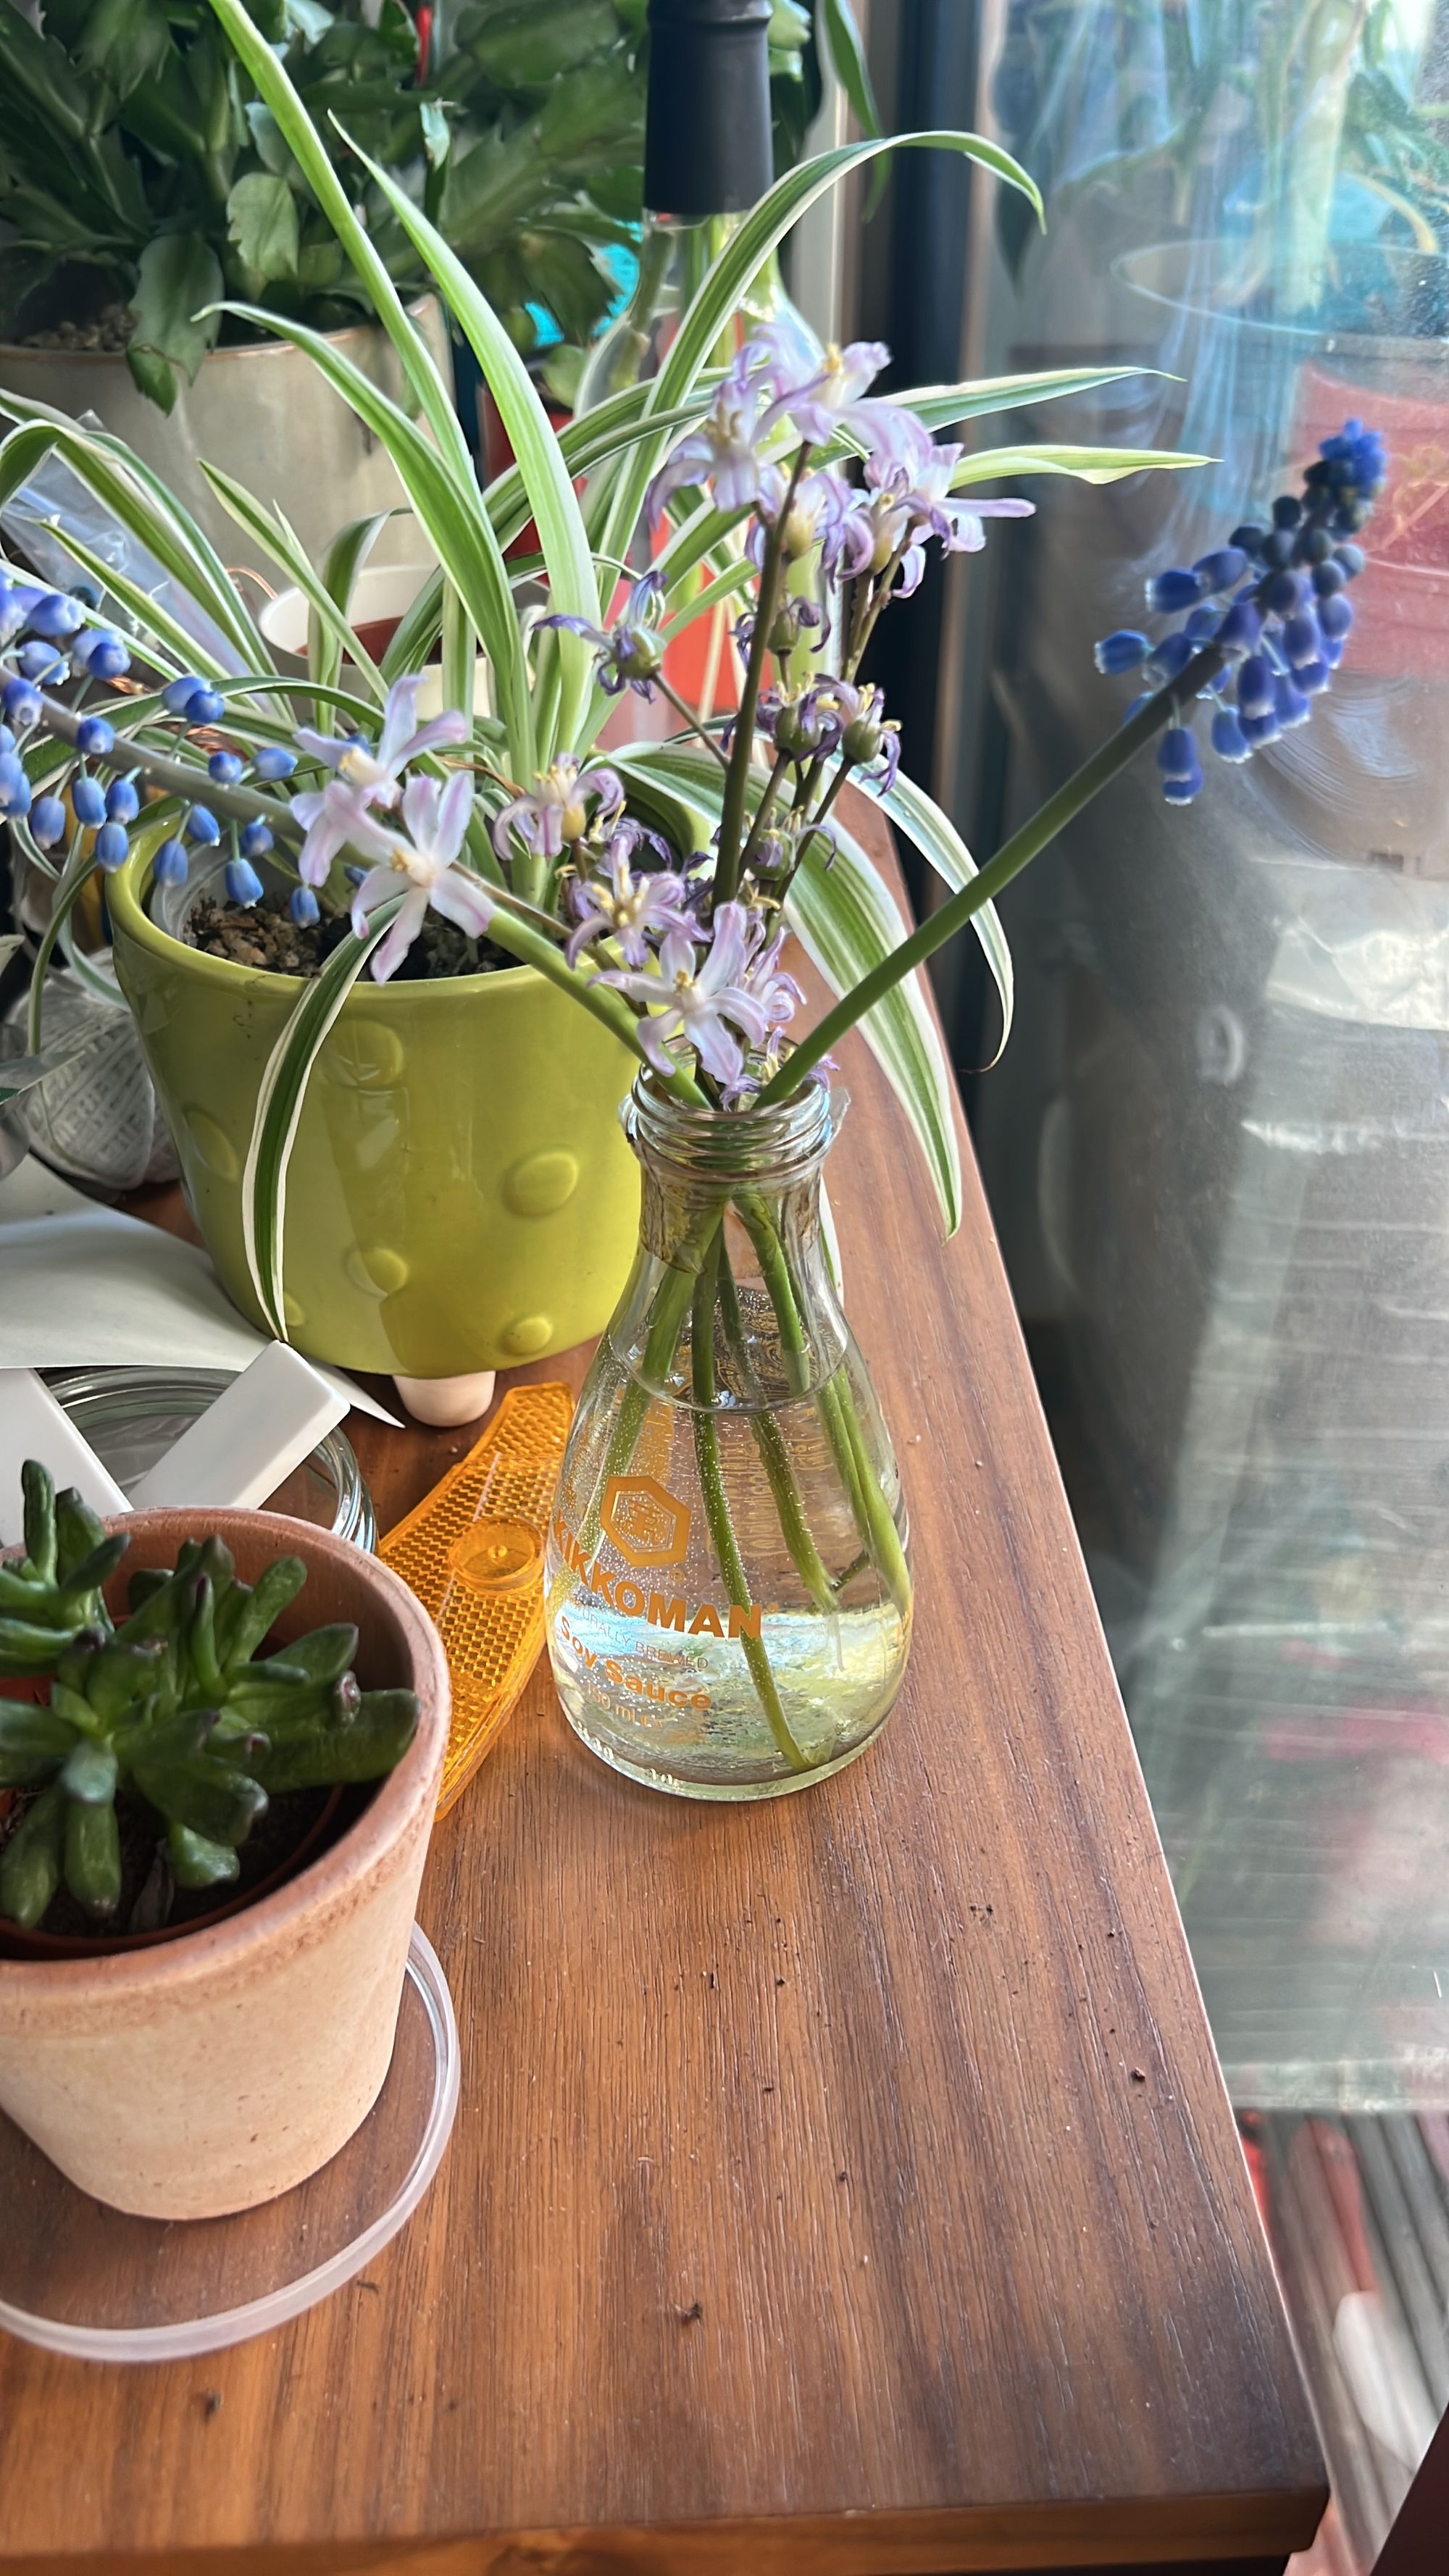 A curved and fluted Kikkoman glass soy sauce bottle on a table, filled with water. Two blue muscari flowers and some squill flowers are in it as a makeshift vase.